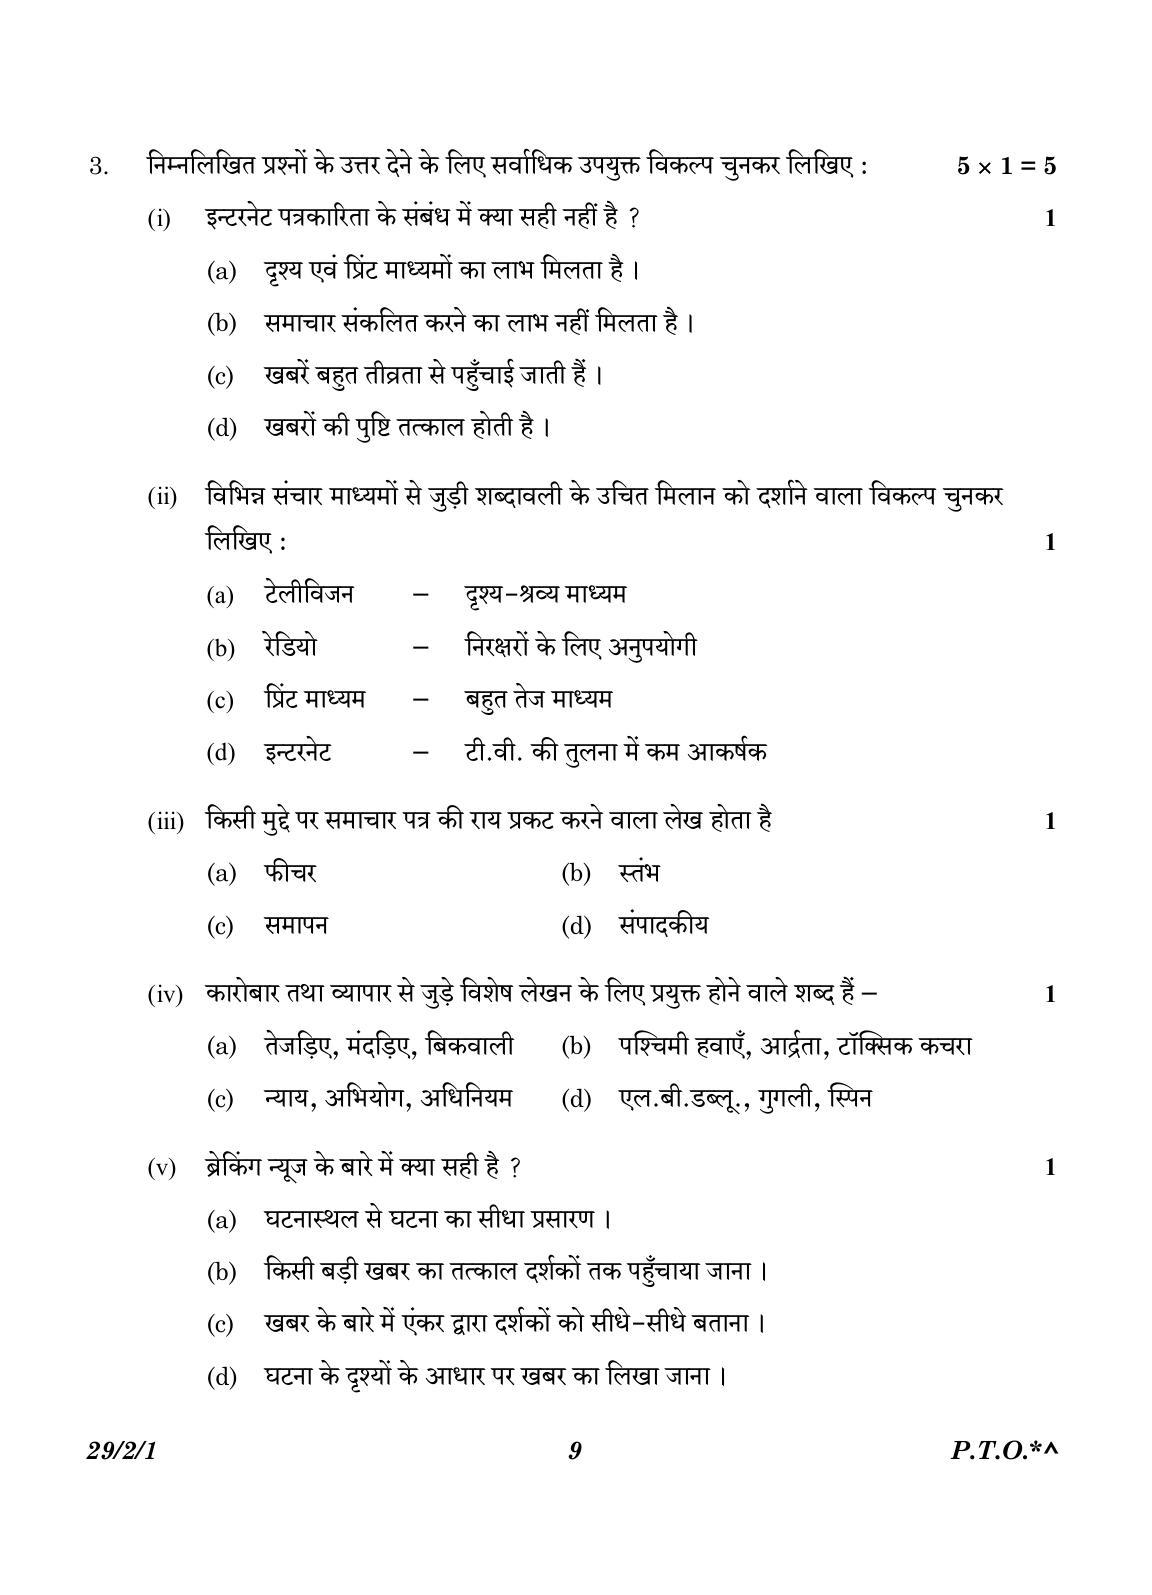 CBSE Class 12 29-2-1 Hindi Elective 2023 Question Paper - Page 9